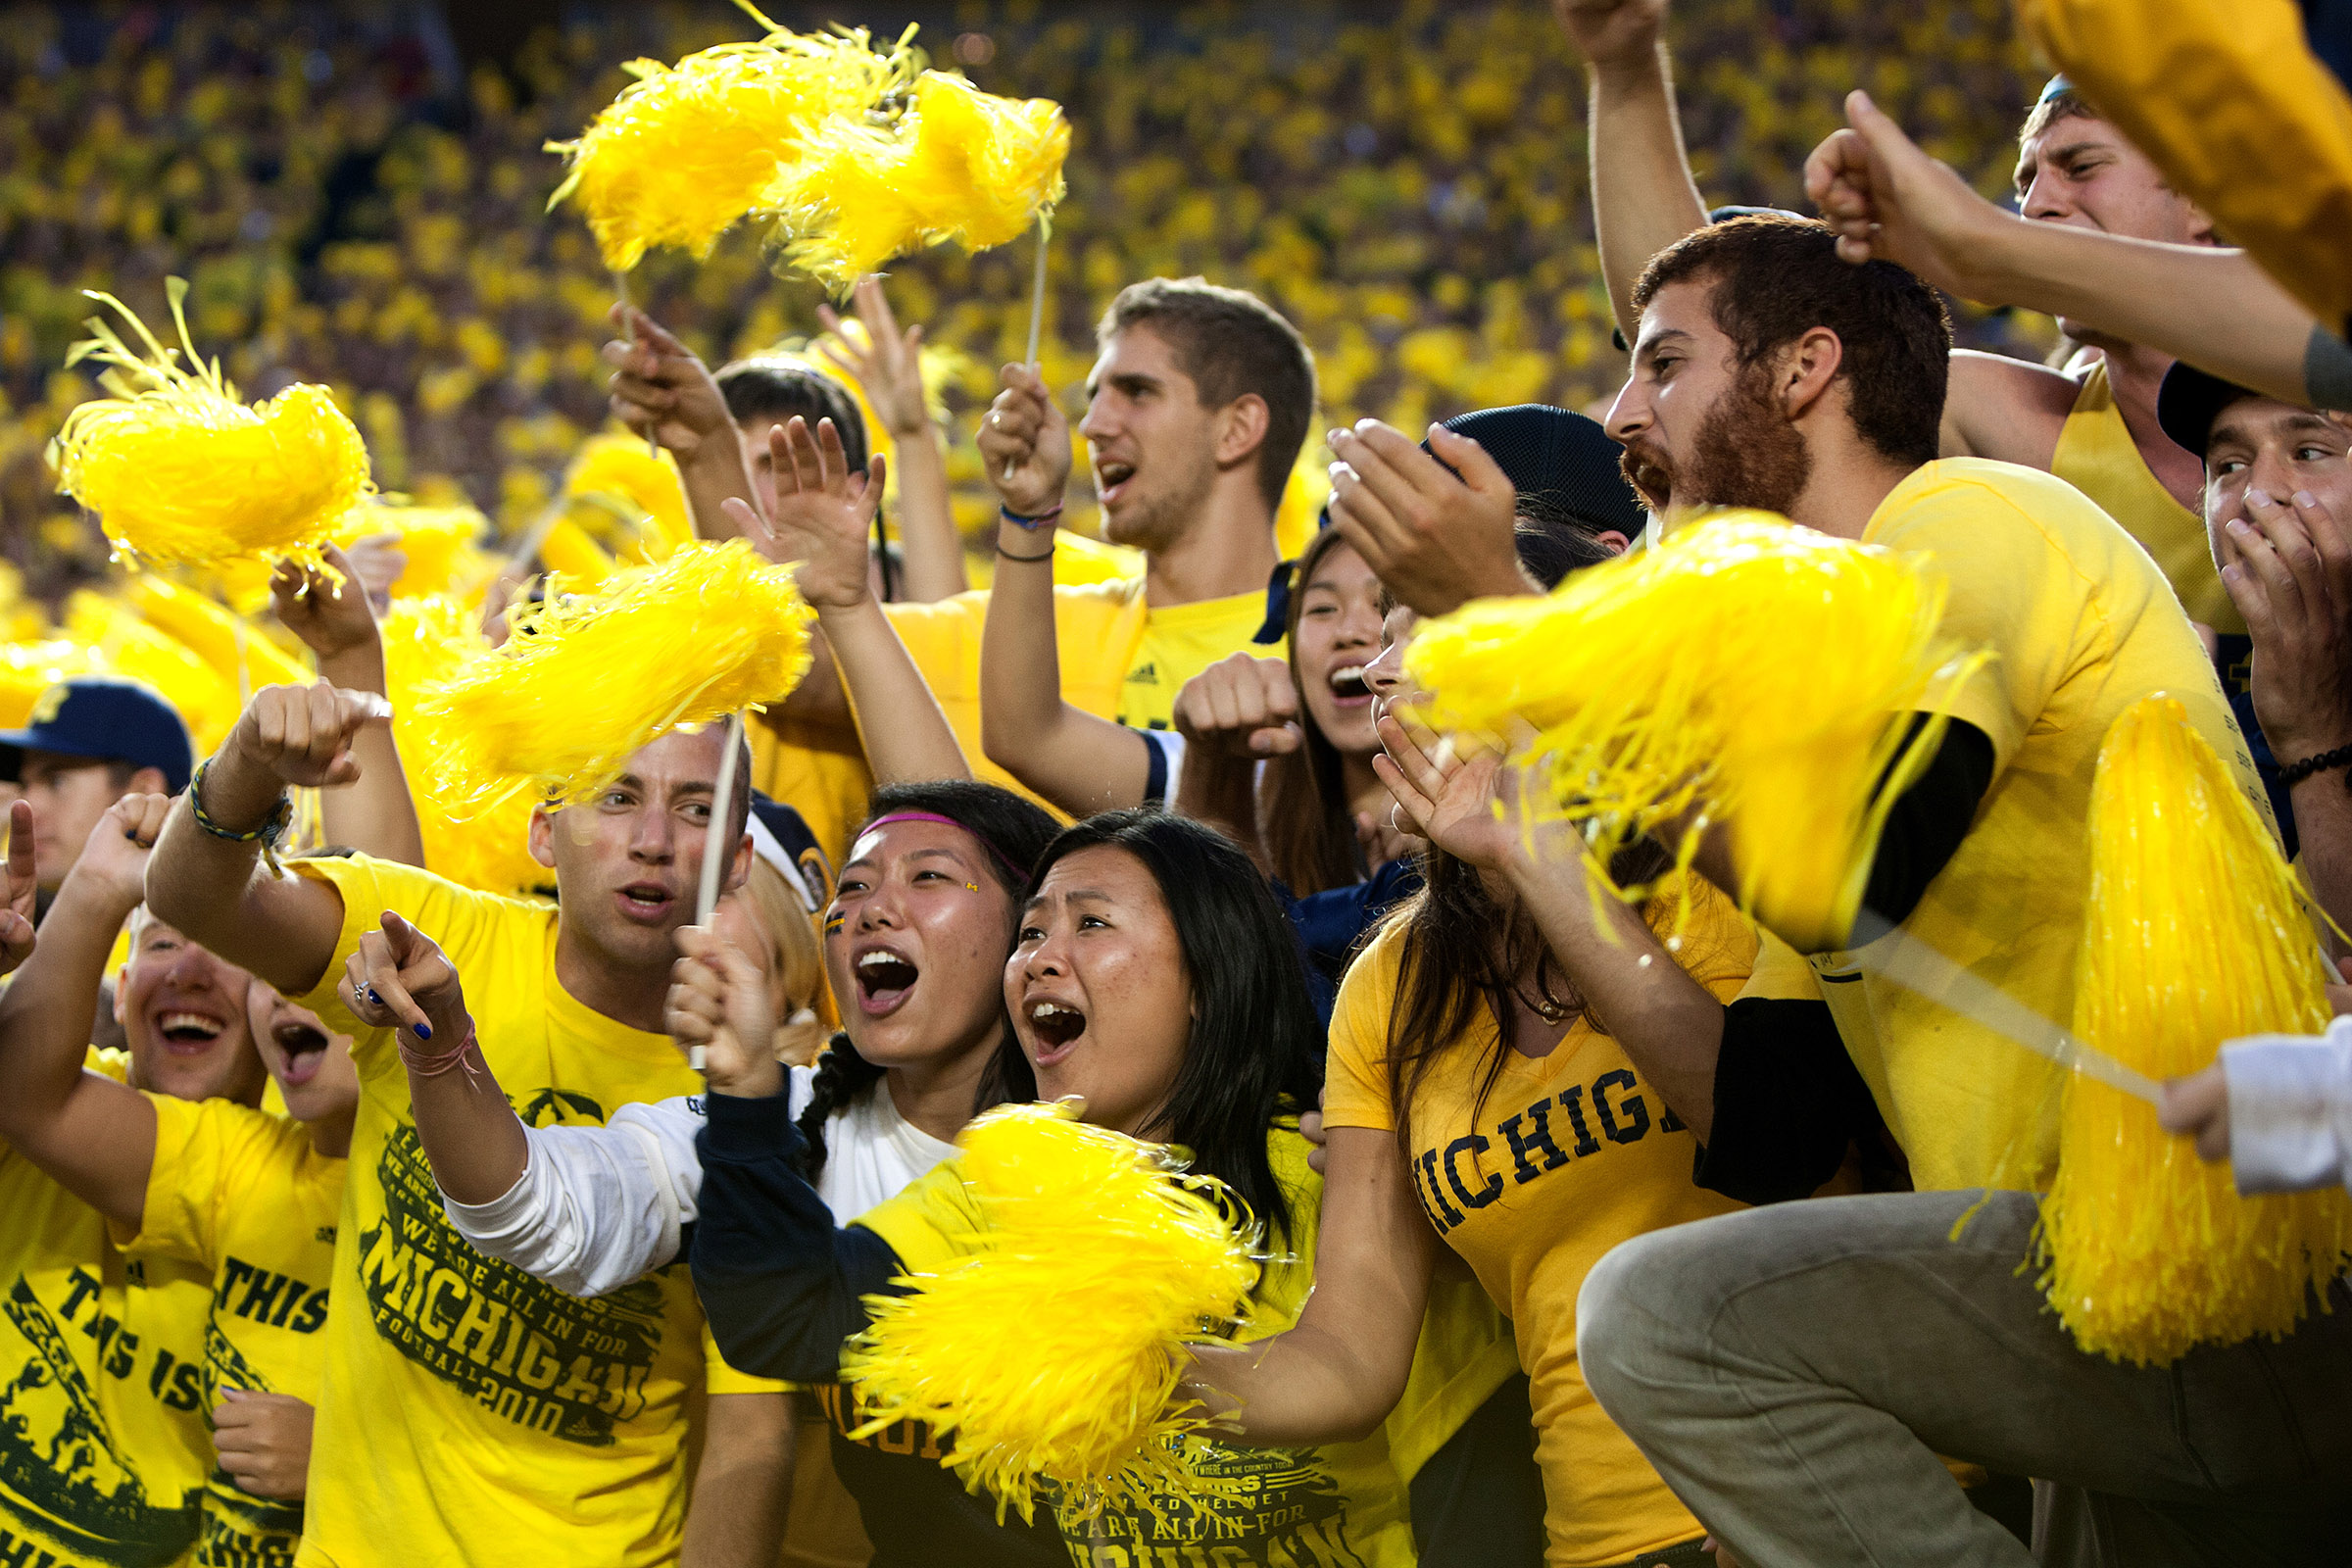 Wearing bright yellow shirts, students in the student section cheer at a U-M football game.